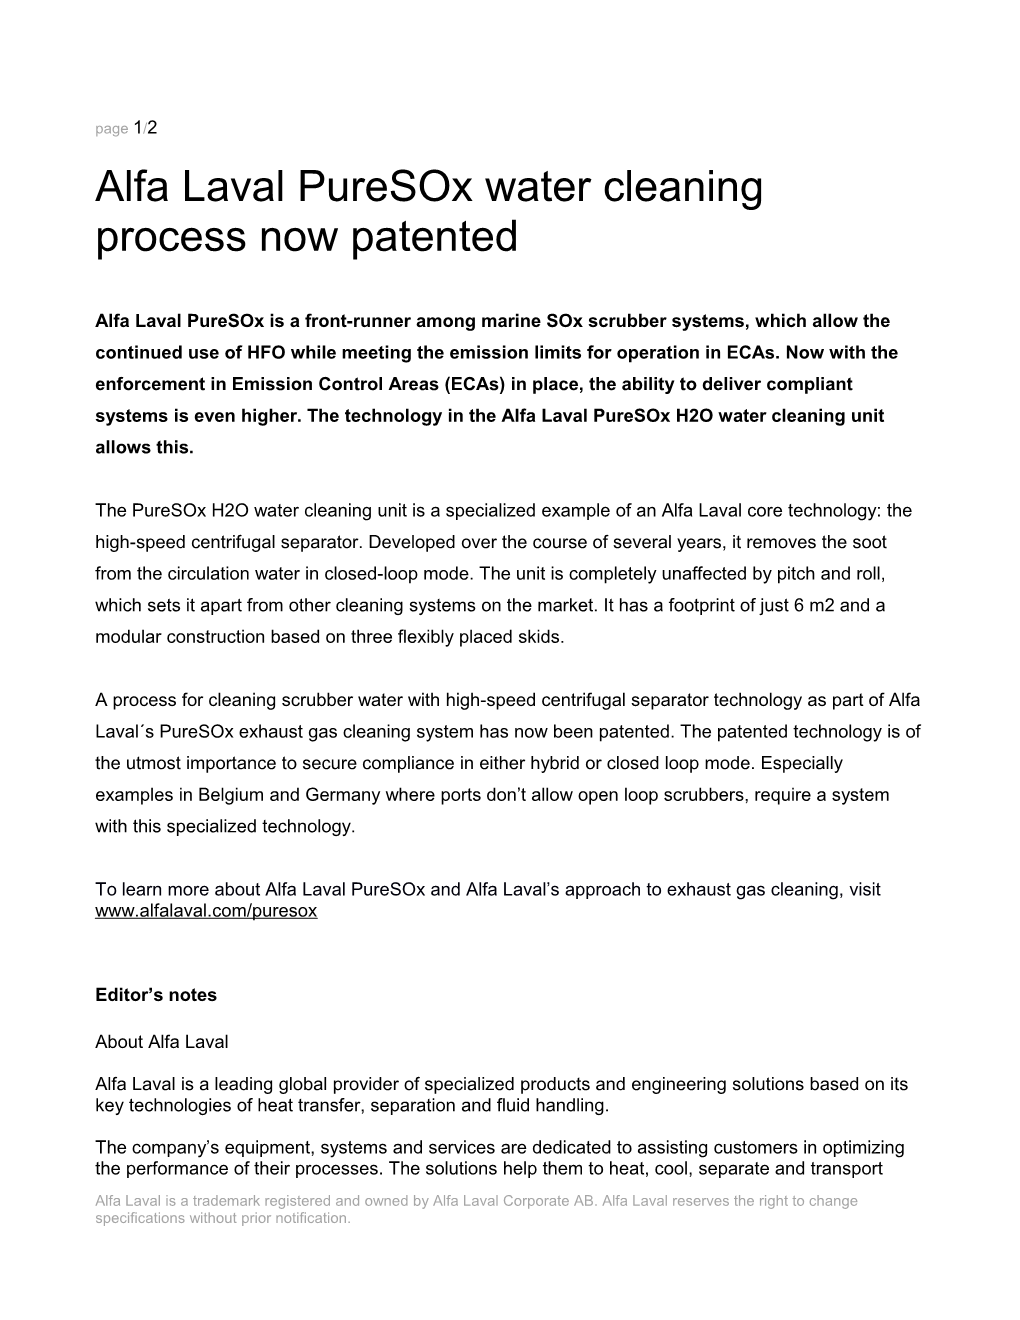 Alfa Laval and RCCL Close Deal for Four Puresox Scrubbers, Including an Inline